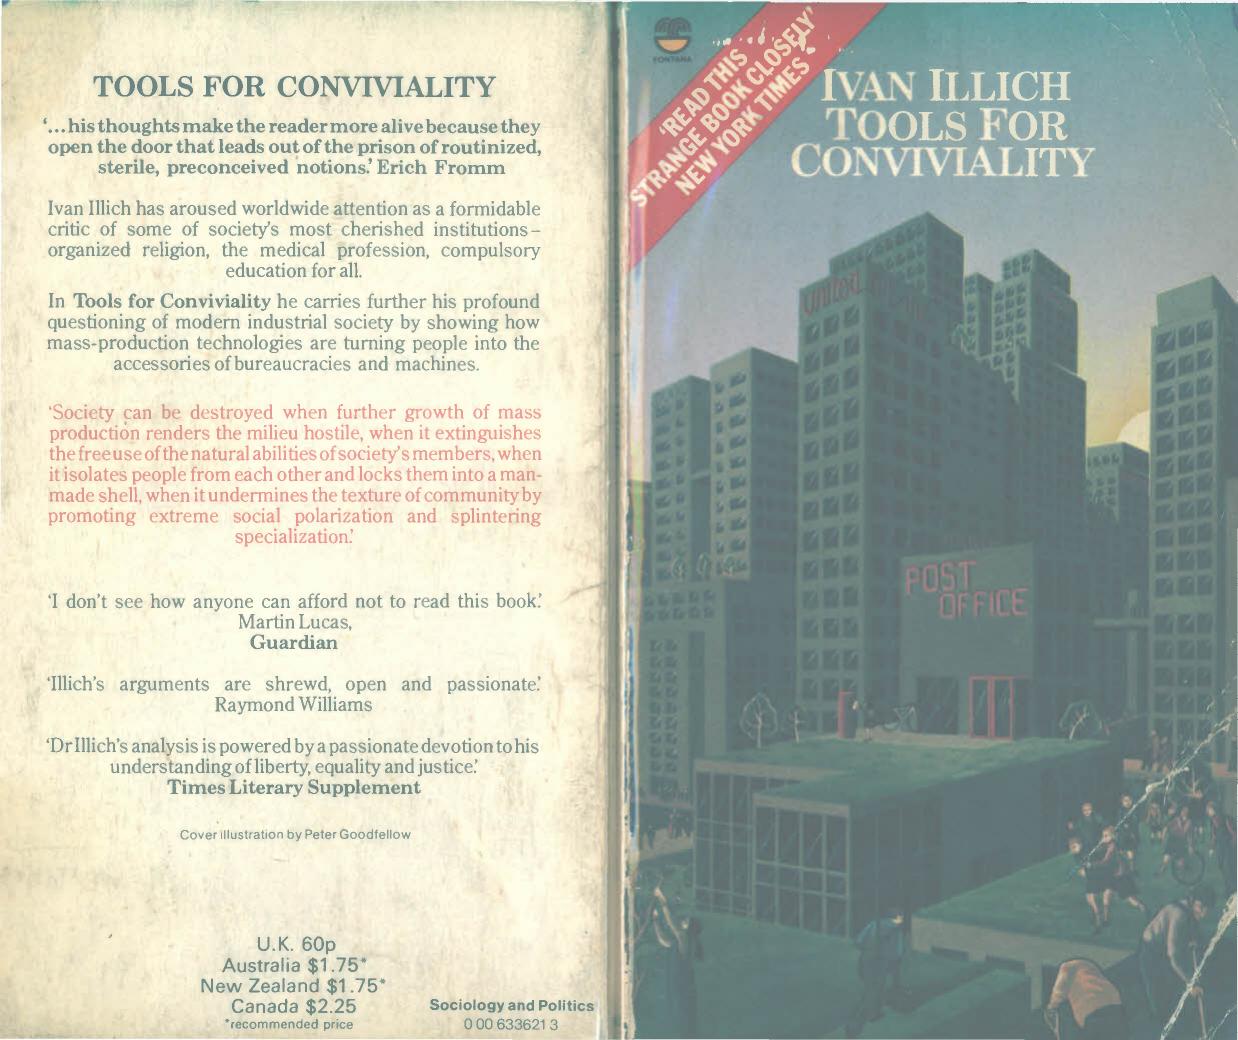 Tools for Conviviality by Ivan Illich